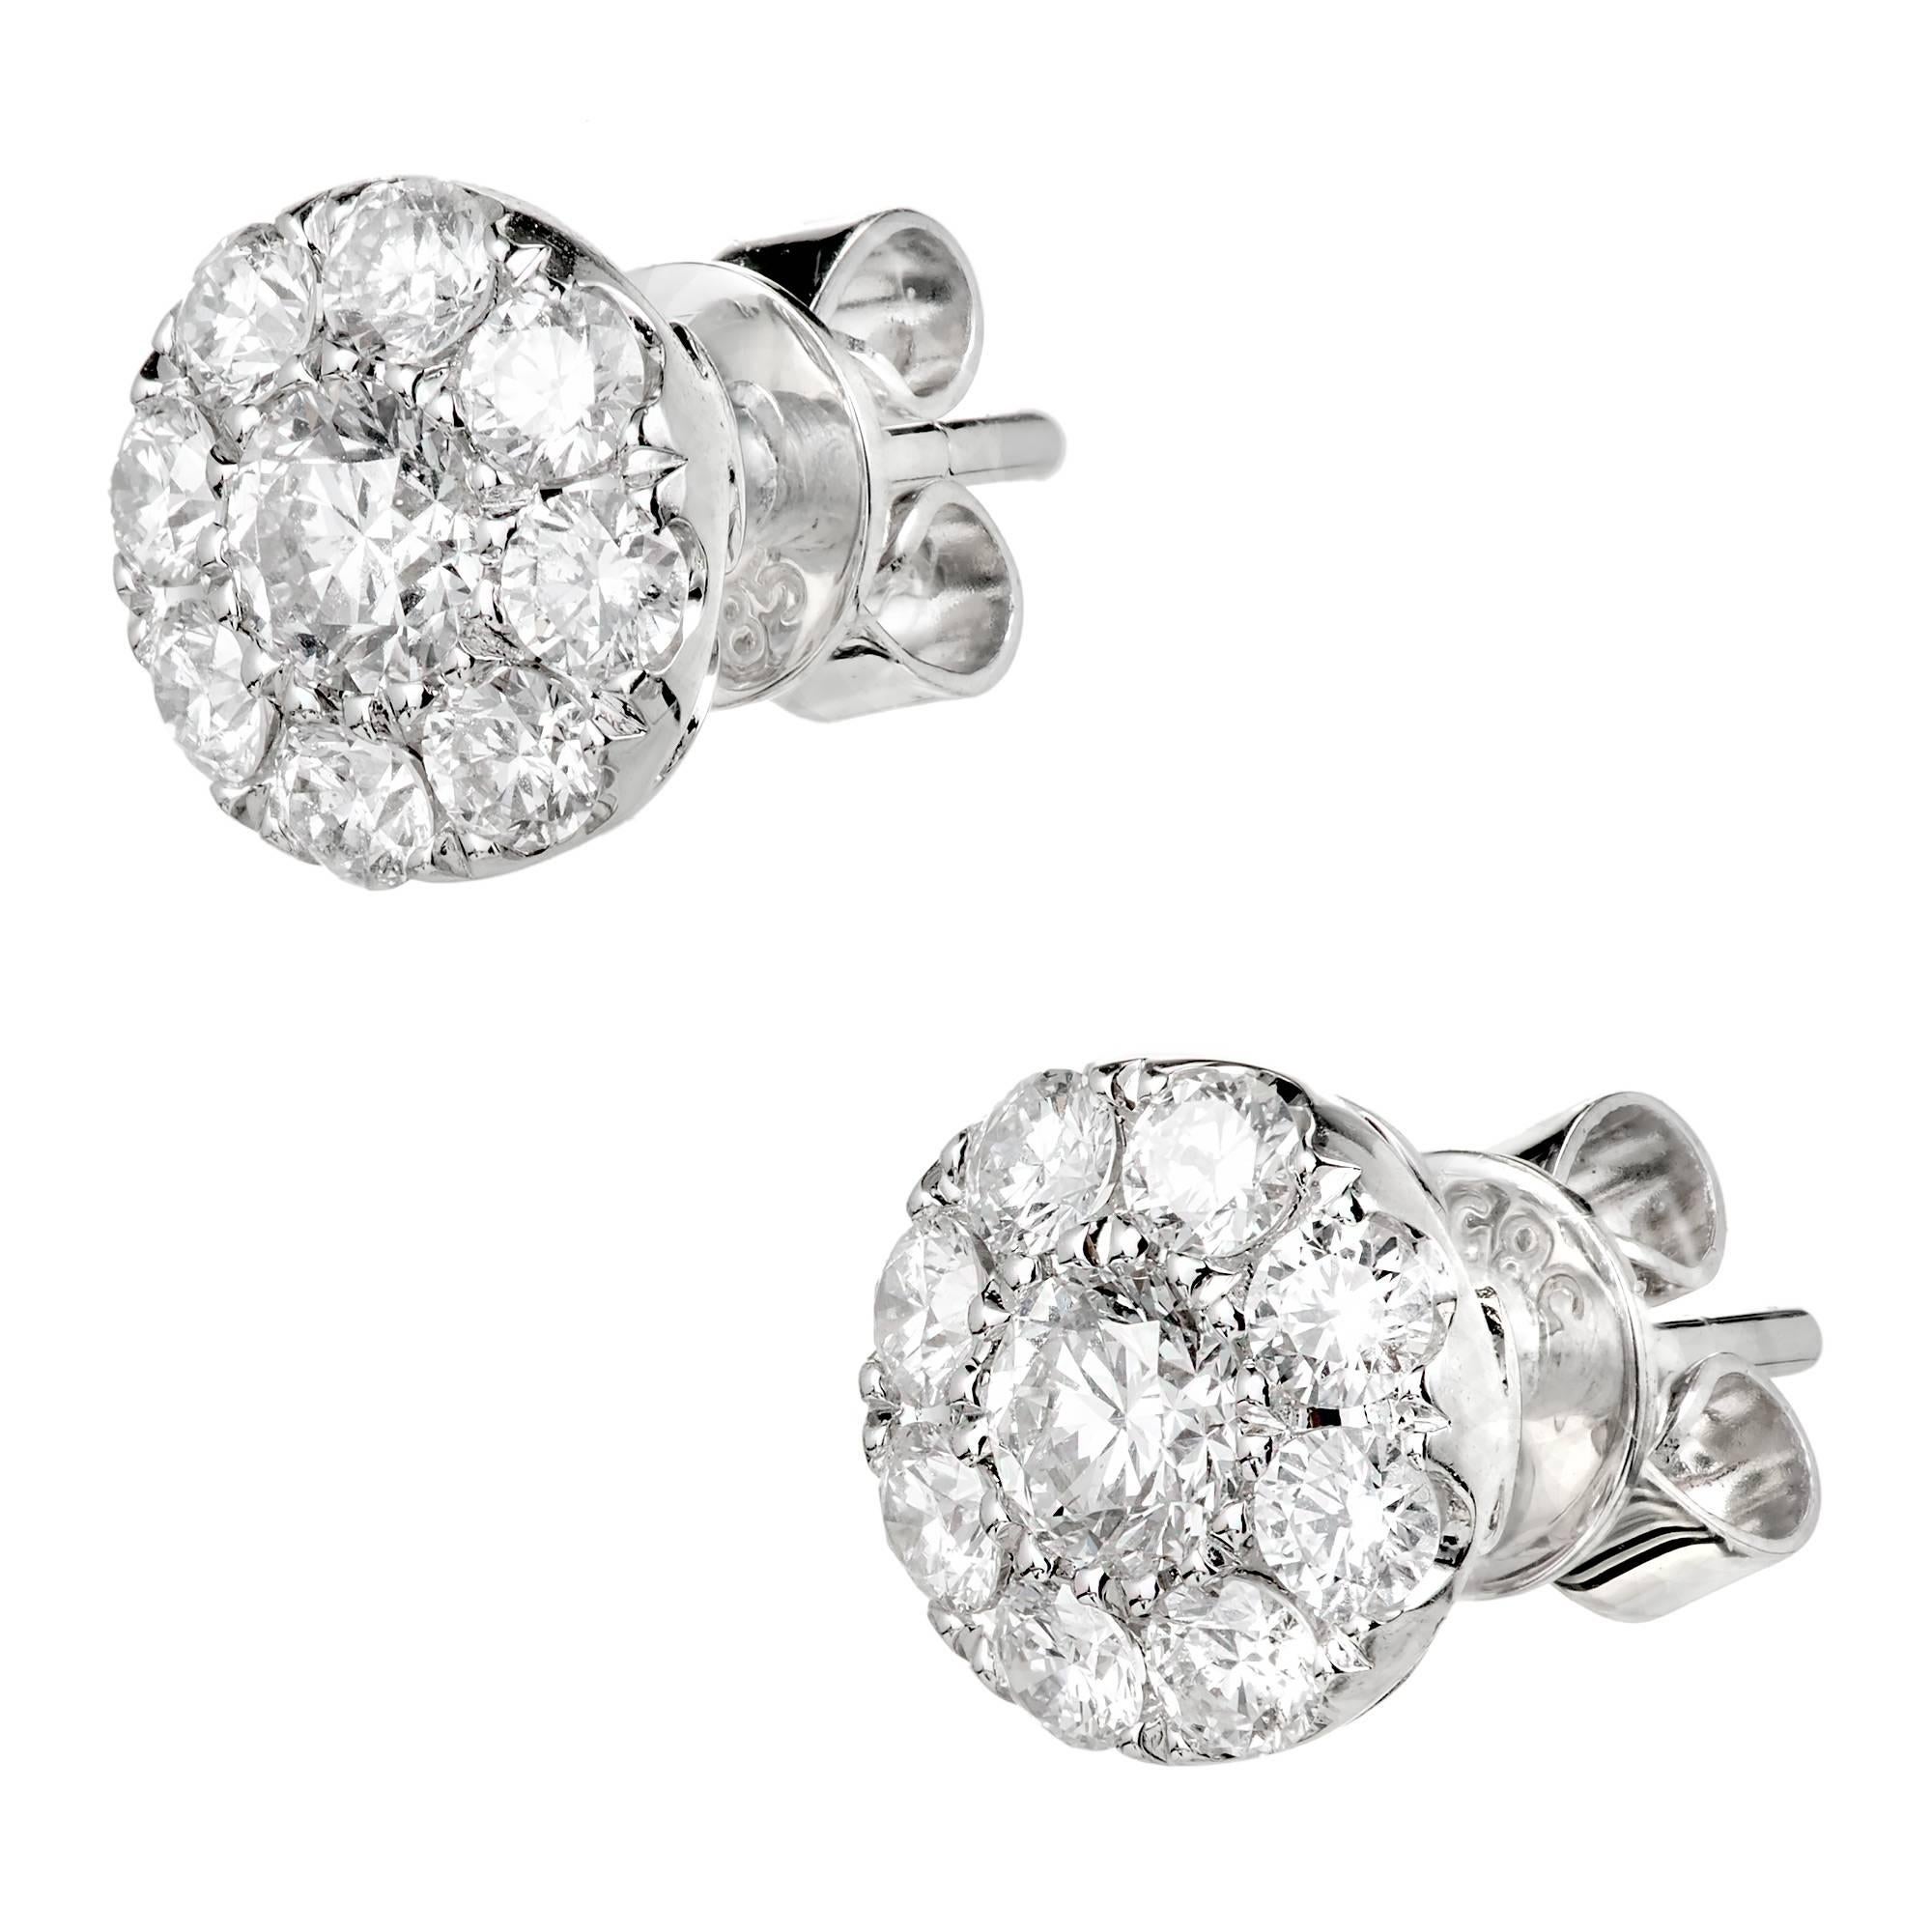 Round Diamond cluster earrings with bright white brilliant cut Diamonds, in 14k white gold.

2 round full cut Diamonds, approx. total weight .33cts, G, VS – SI
16 round full cut Diamonds, approx. total weight .90cts, G, VS – SI
14k white gold
1.9